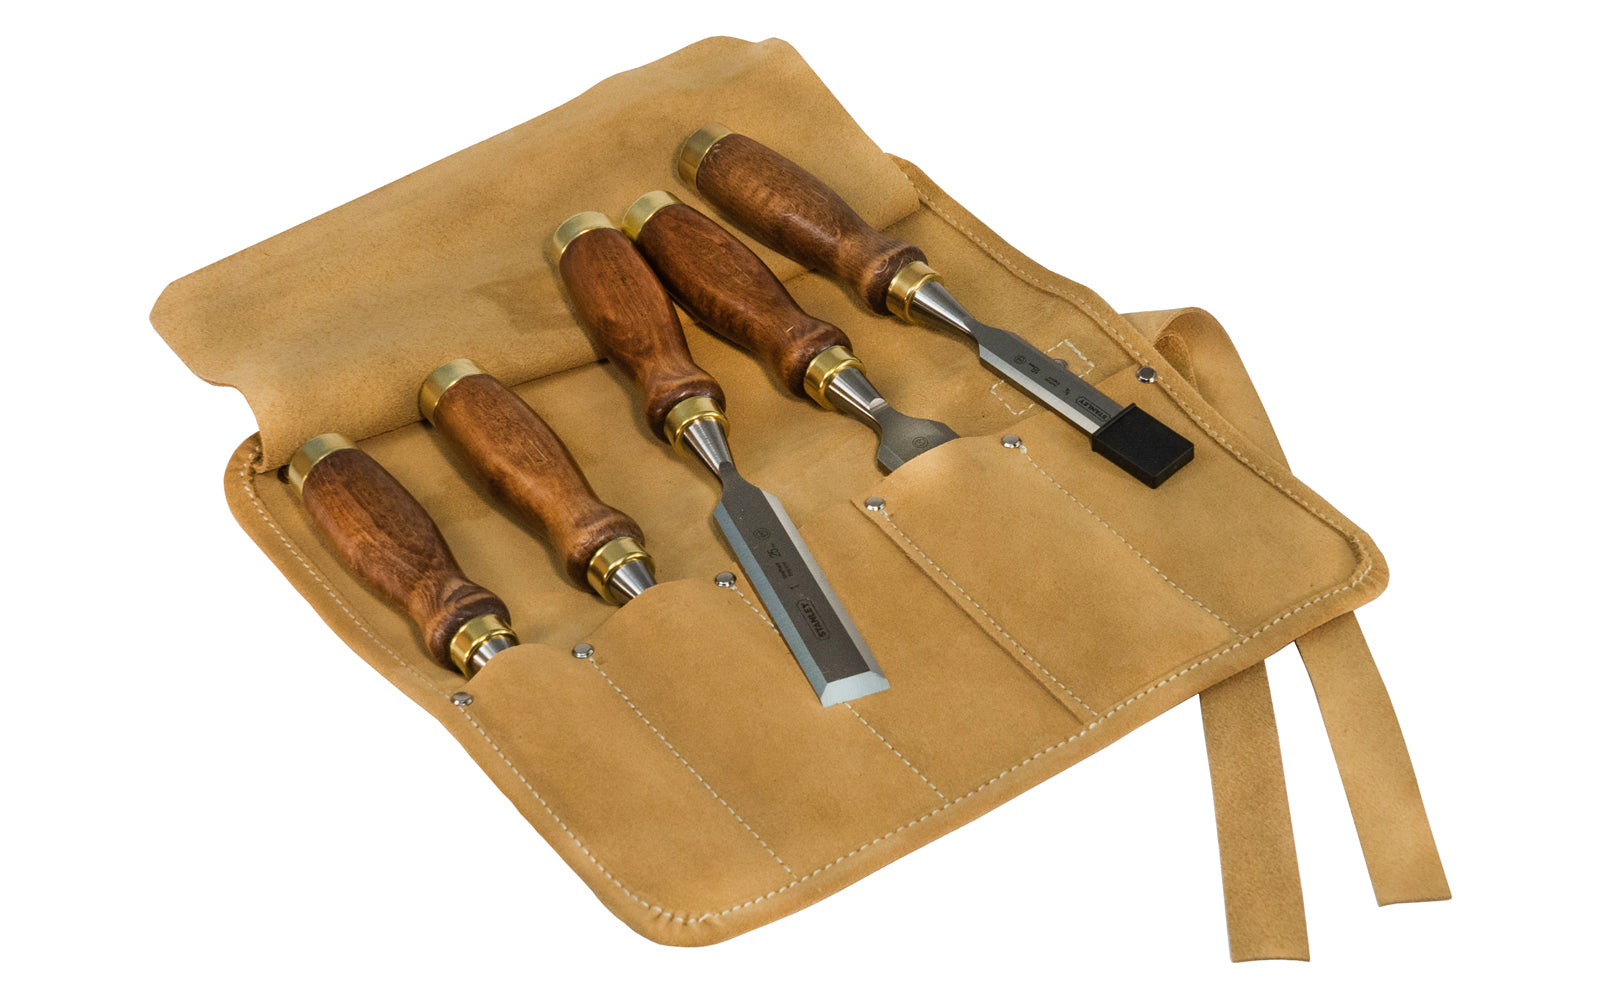 Libraton Woodworking Chisel Set, 4pcs Cr-V Wood Chisels Set, Professional  Chisels with Leather Pouch for